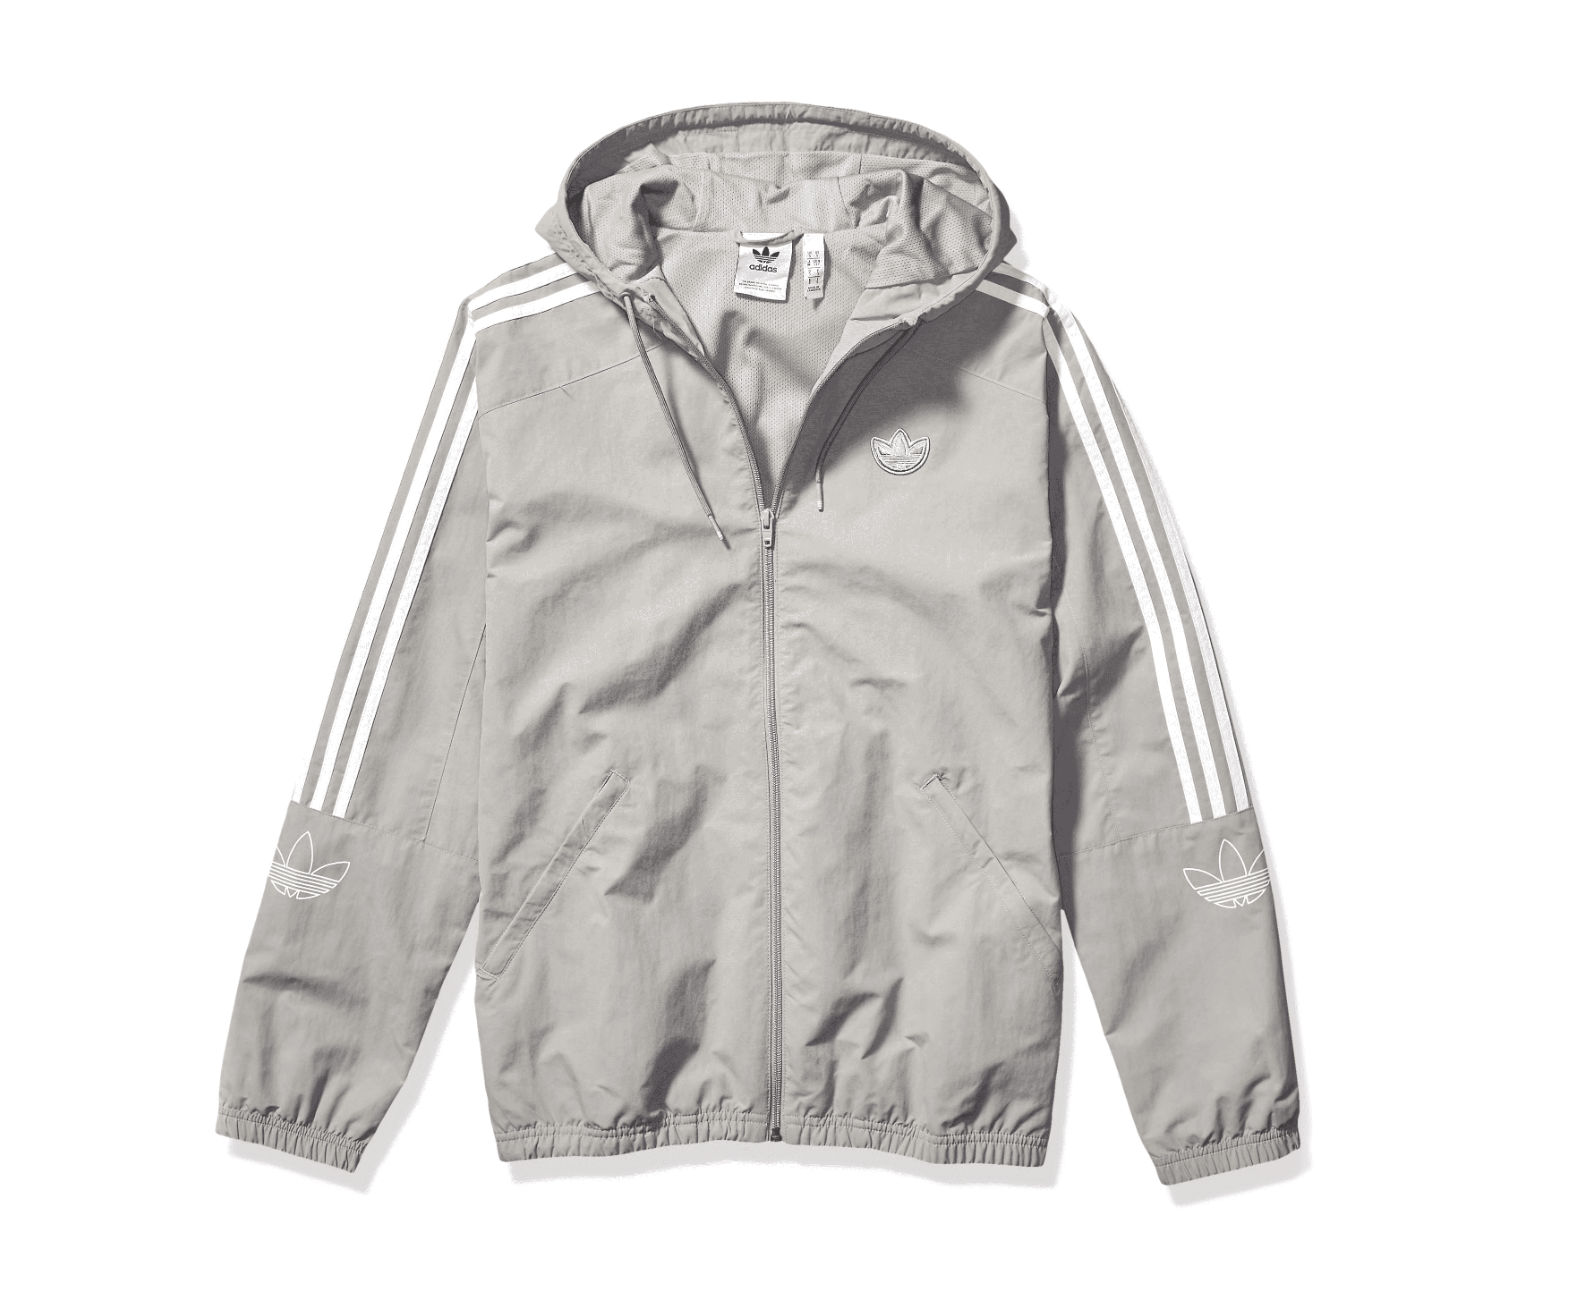 50% OFF the adidas Outline Windbreaker 